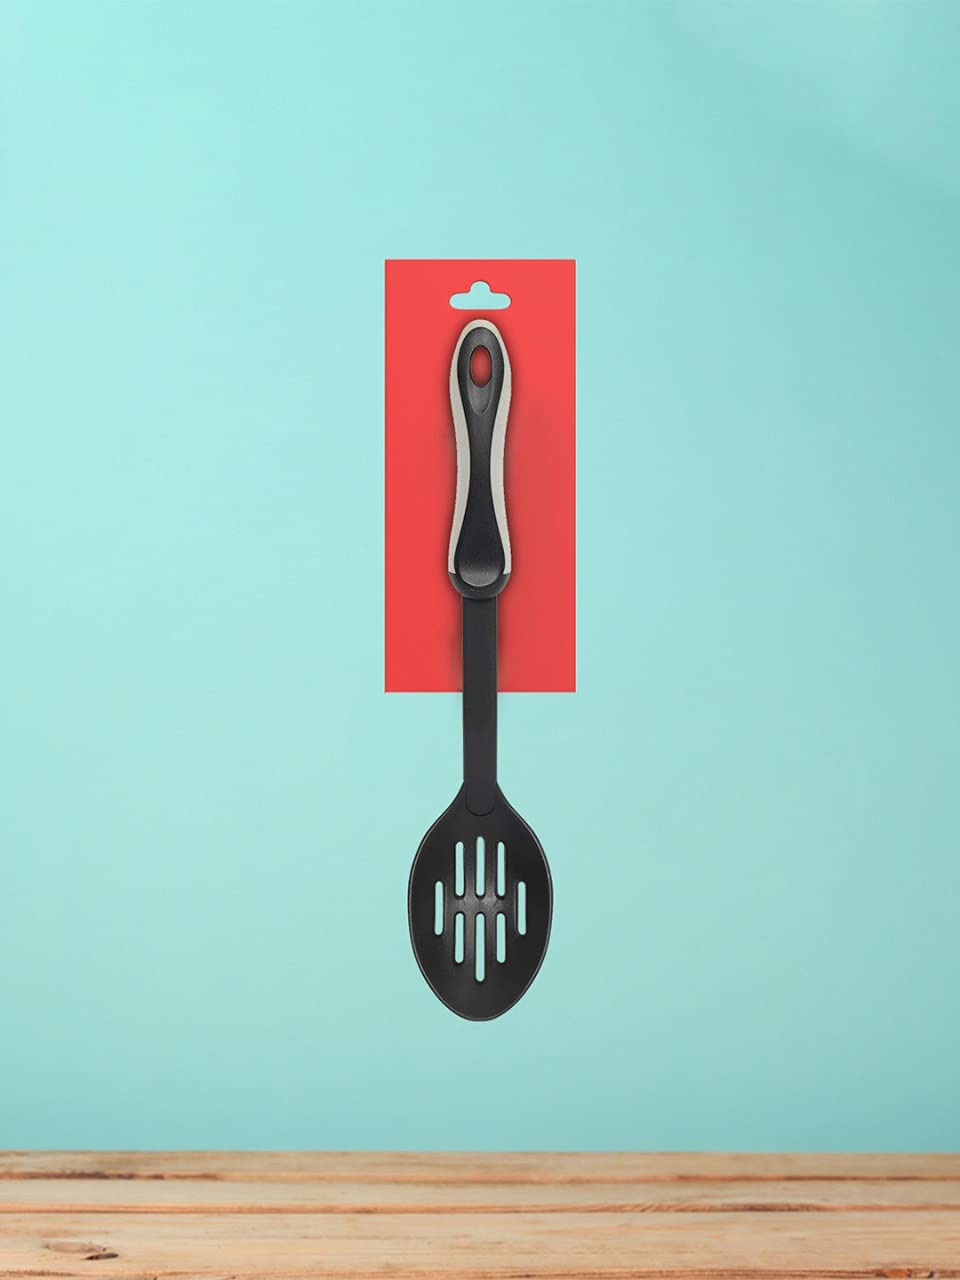 Essential Slotted Spoon Nylon